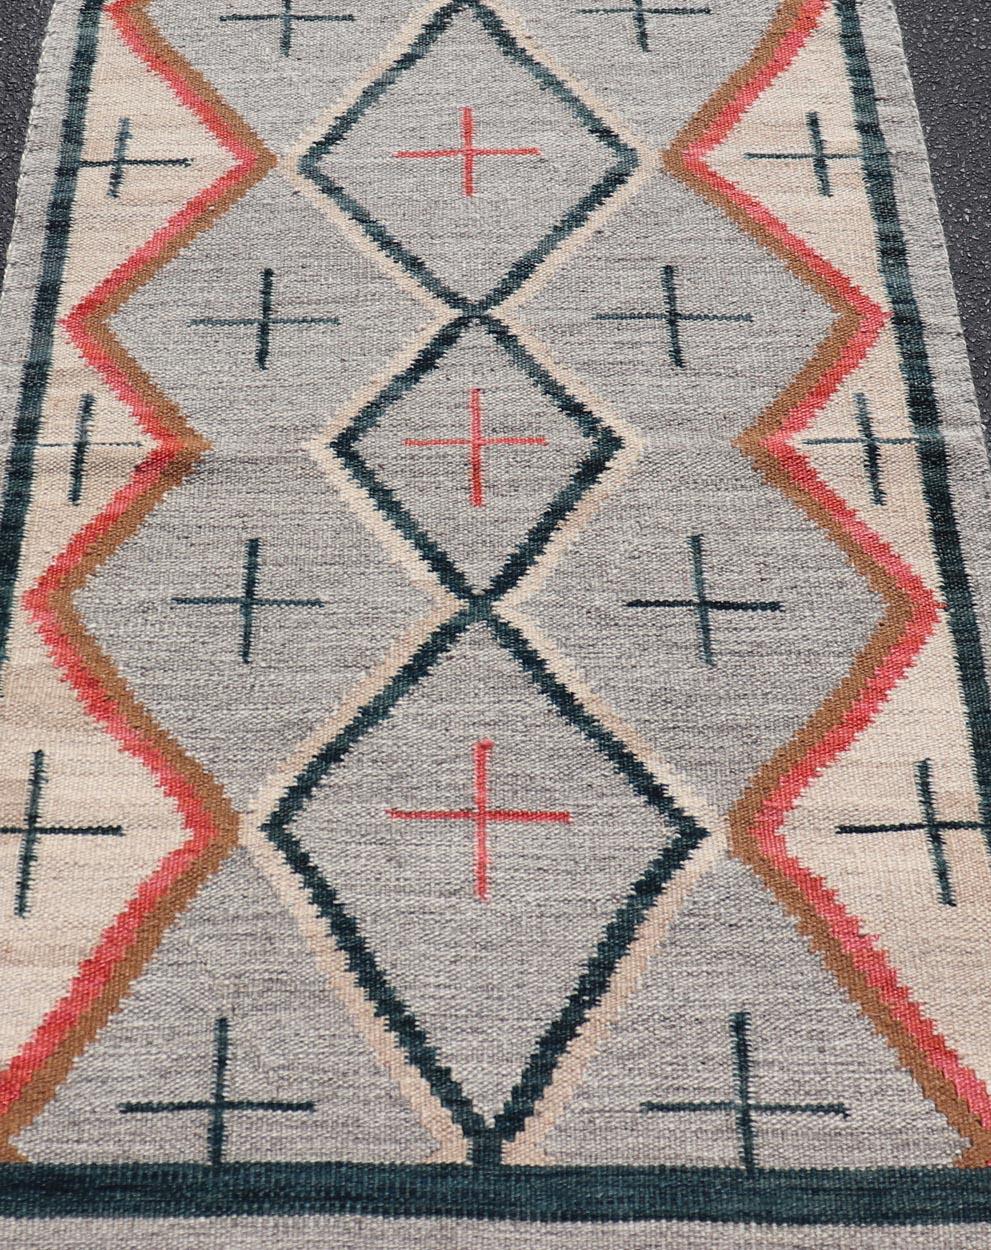 Modern Navajo Rug with Entwined Tribal Design in Gray, Red, Charcoal, And Ivory. Keivan Woven Arts / rug RSC-67815-AR-113, country of origin India, type: North America / Navajo, circa early 21st century
Measures: 3'1 x 5'0 
This intriguing